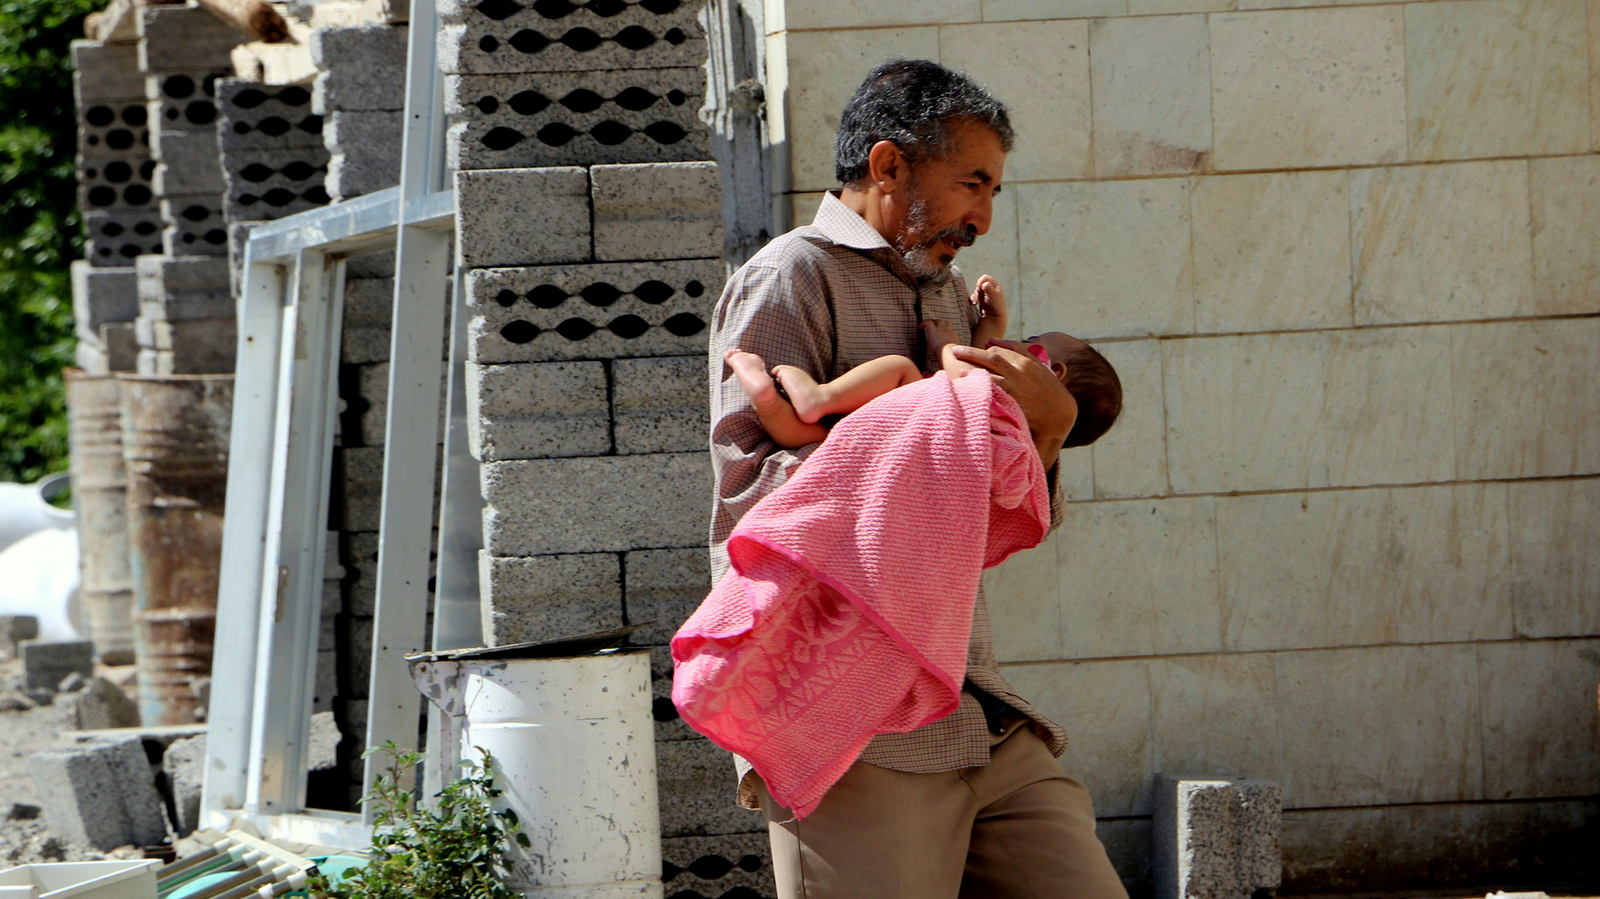 A child who was injured in Saudi Arabia's ongoing assault on Yemen is brought to a hospital by her father, in Taiz, Yemen, Sunday, Oct. 25, 2015. The U.N. says at least 2,577 civilians were killed since the Saudi-led air campaign began in March, while 5,078 have been injured. (AP Photo/Abdulnasser Alseddik)